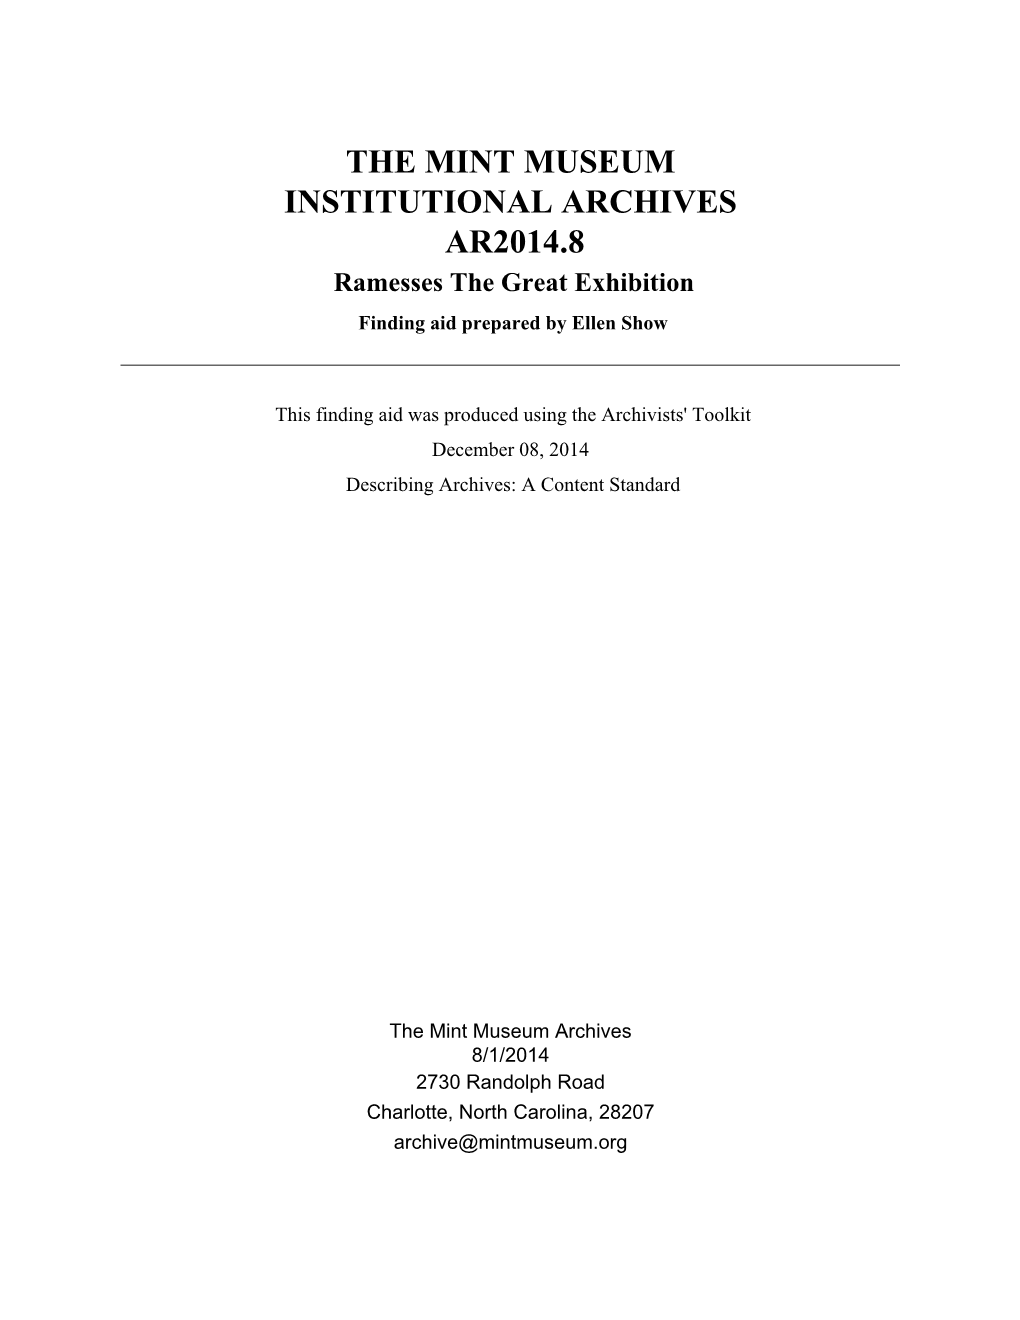 THE MINT MUSEUM INSTITUTIONAL ARCHIVES AR2014.8 Ramesses the Great Exhibition Finding Aid Prepared by Ellen Show